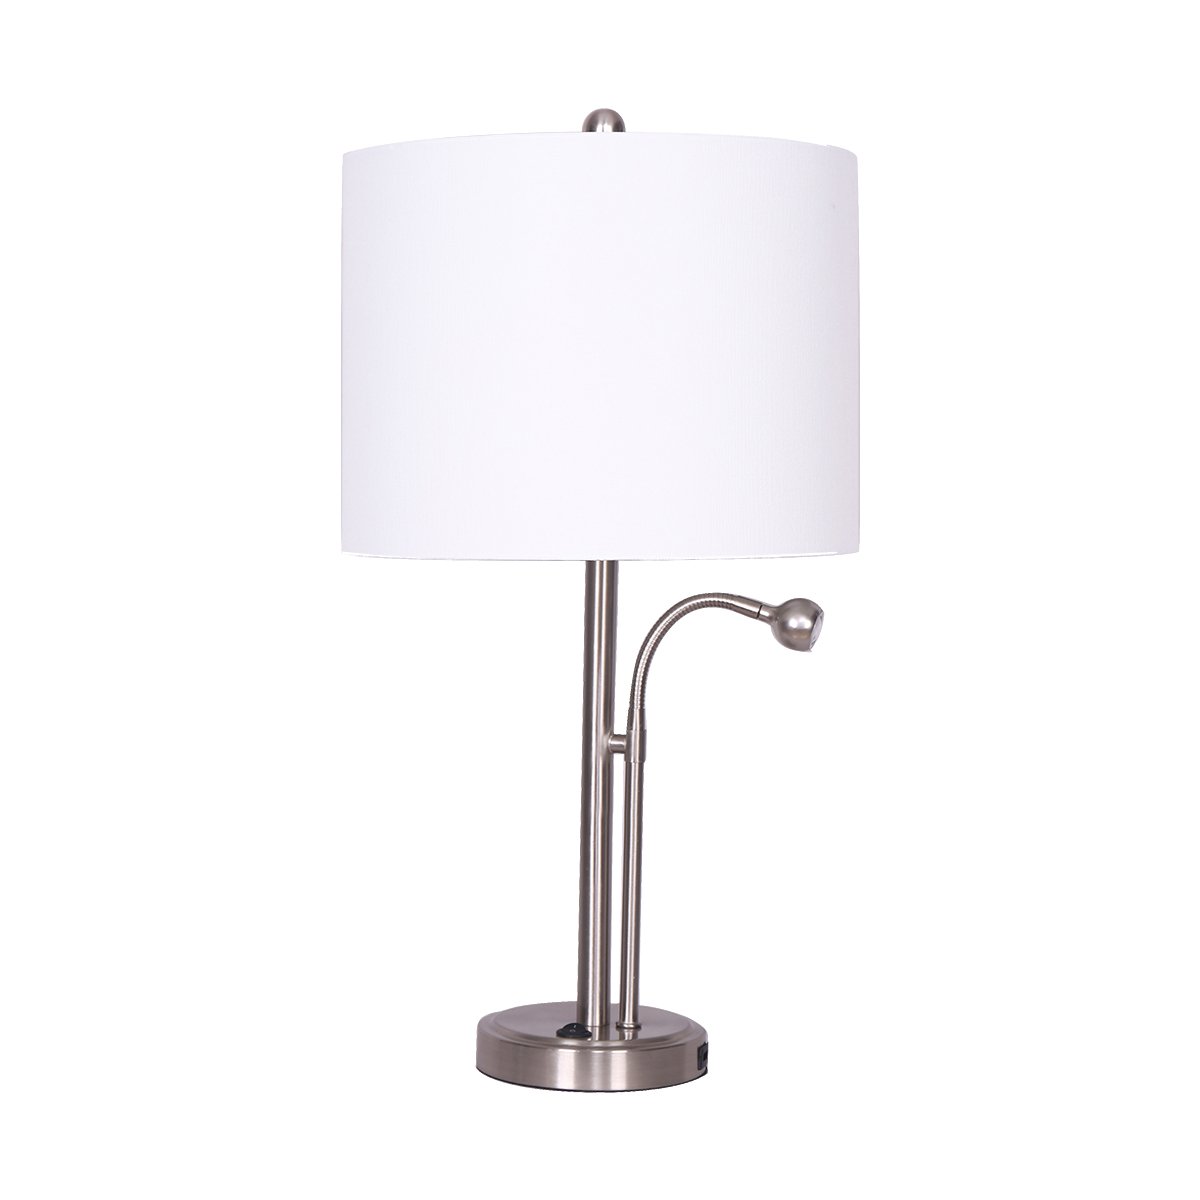 Sarantino 2-in-1 Table Lamp with LED Reading Light